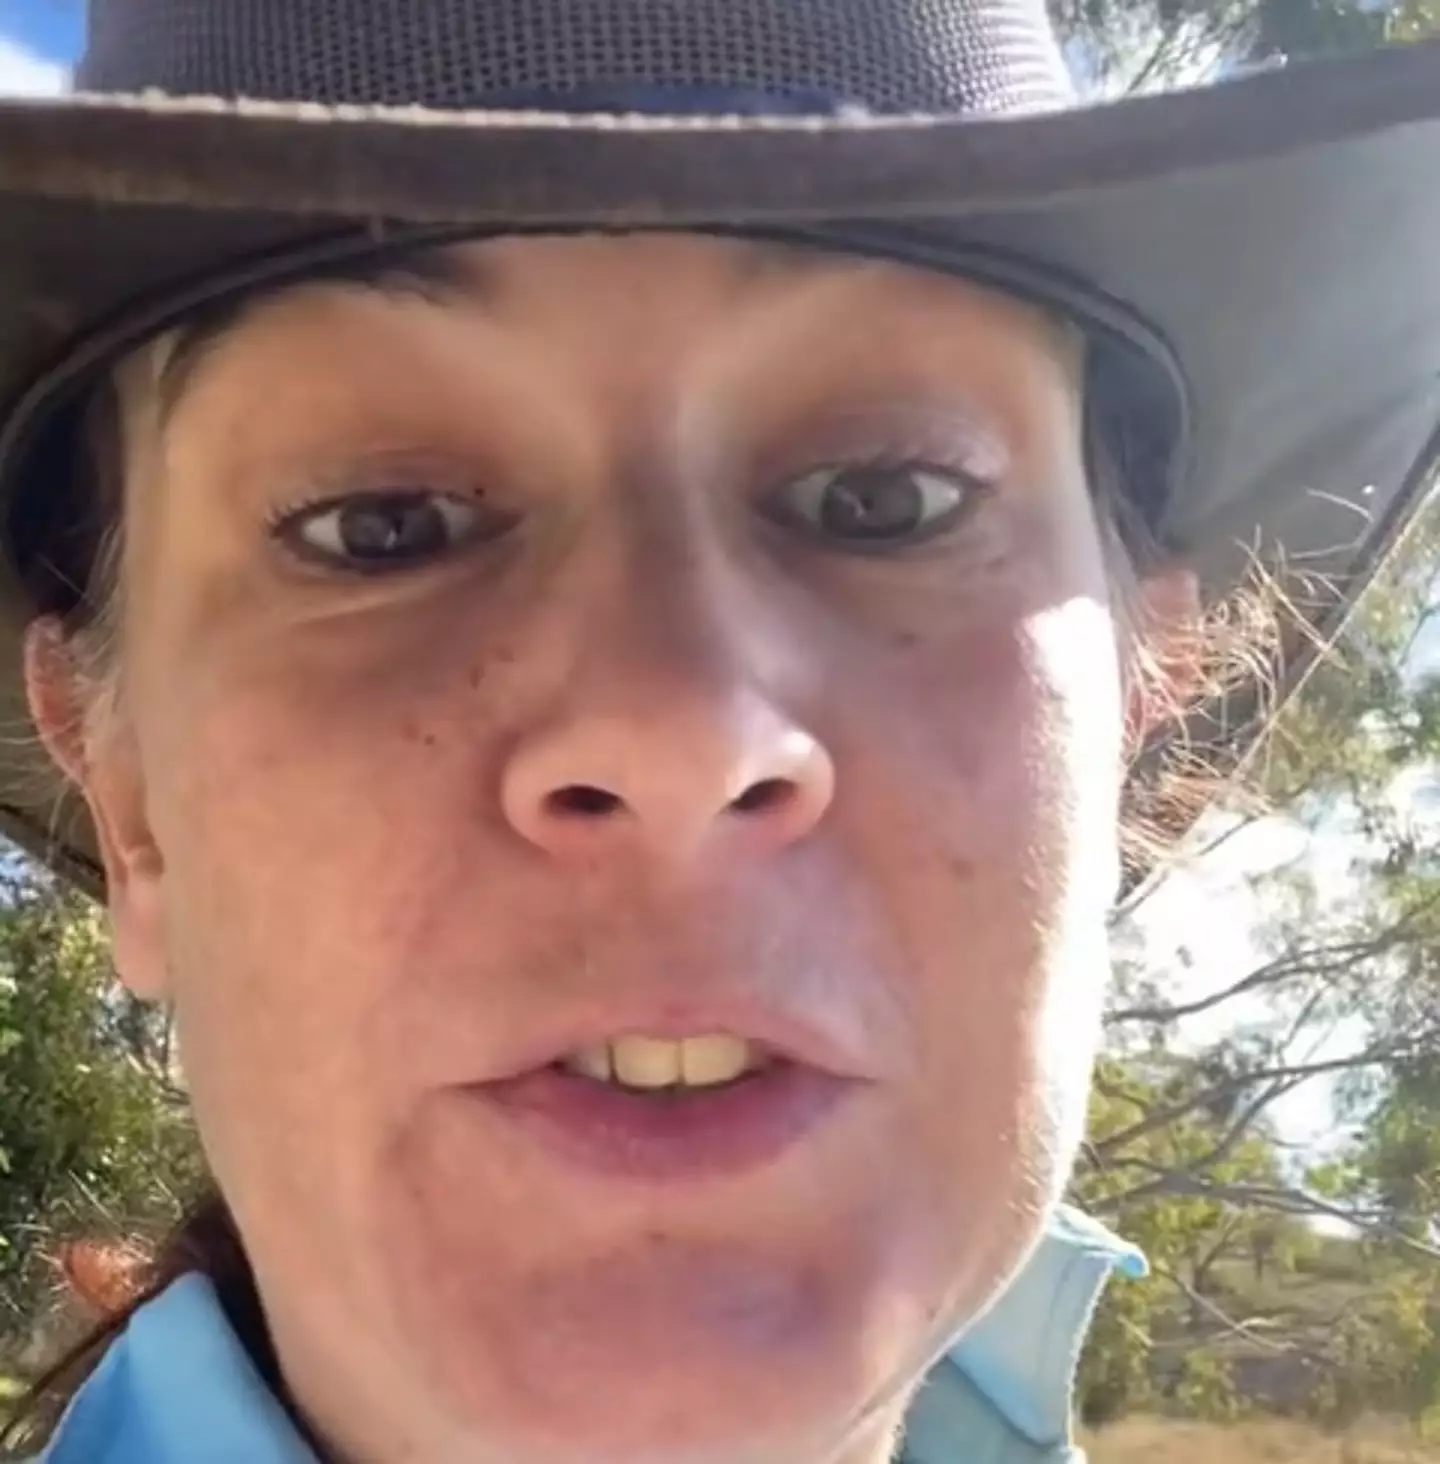 The 41-year-old runs a gardening business and volunteers for the Rural Fire Service.